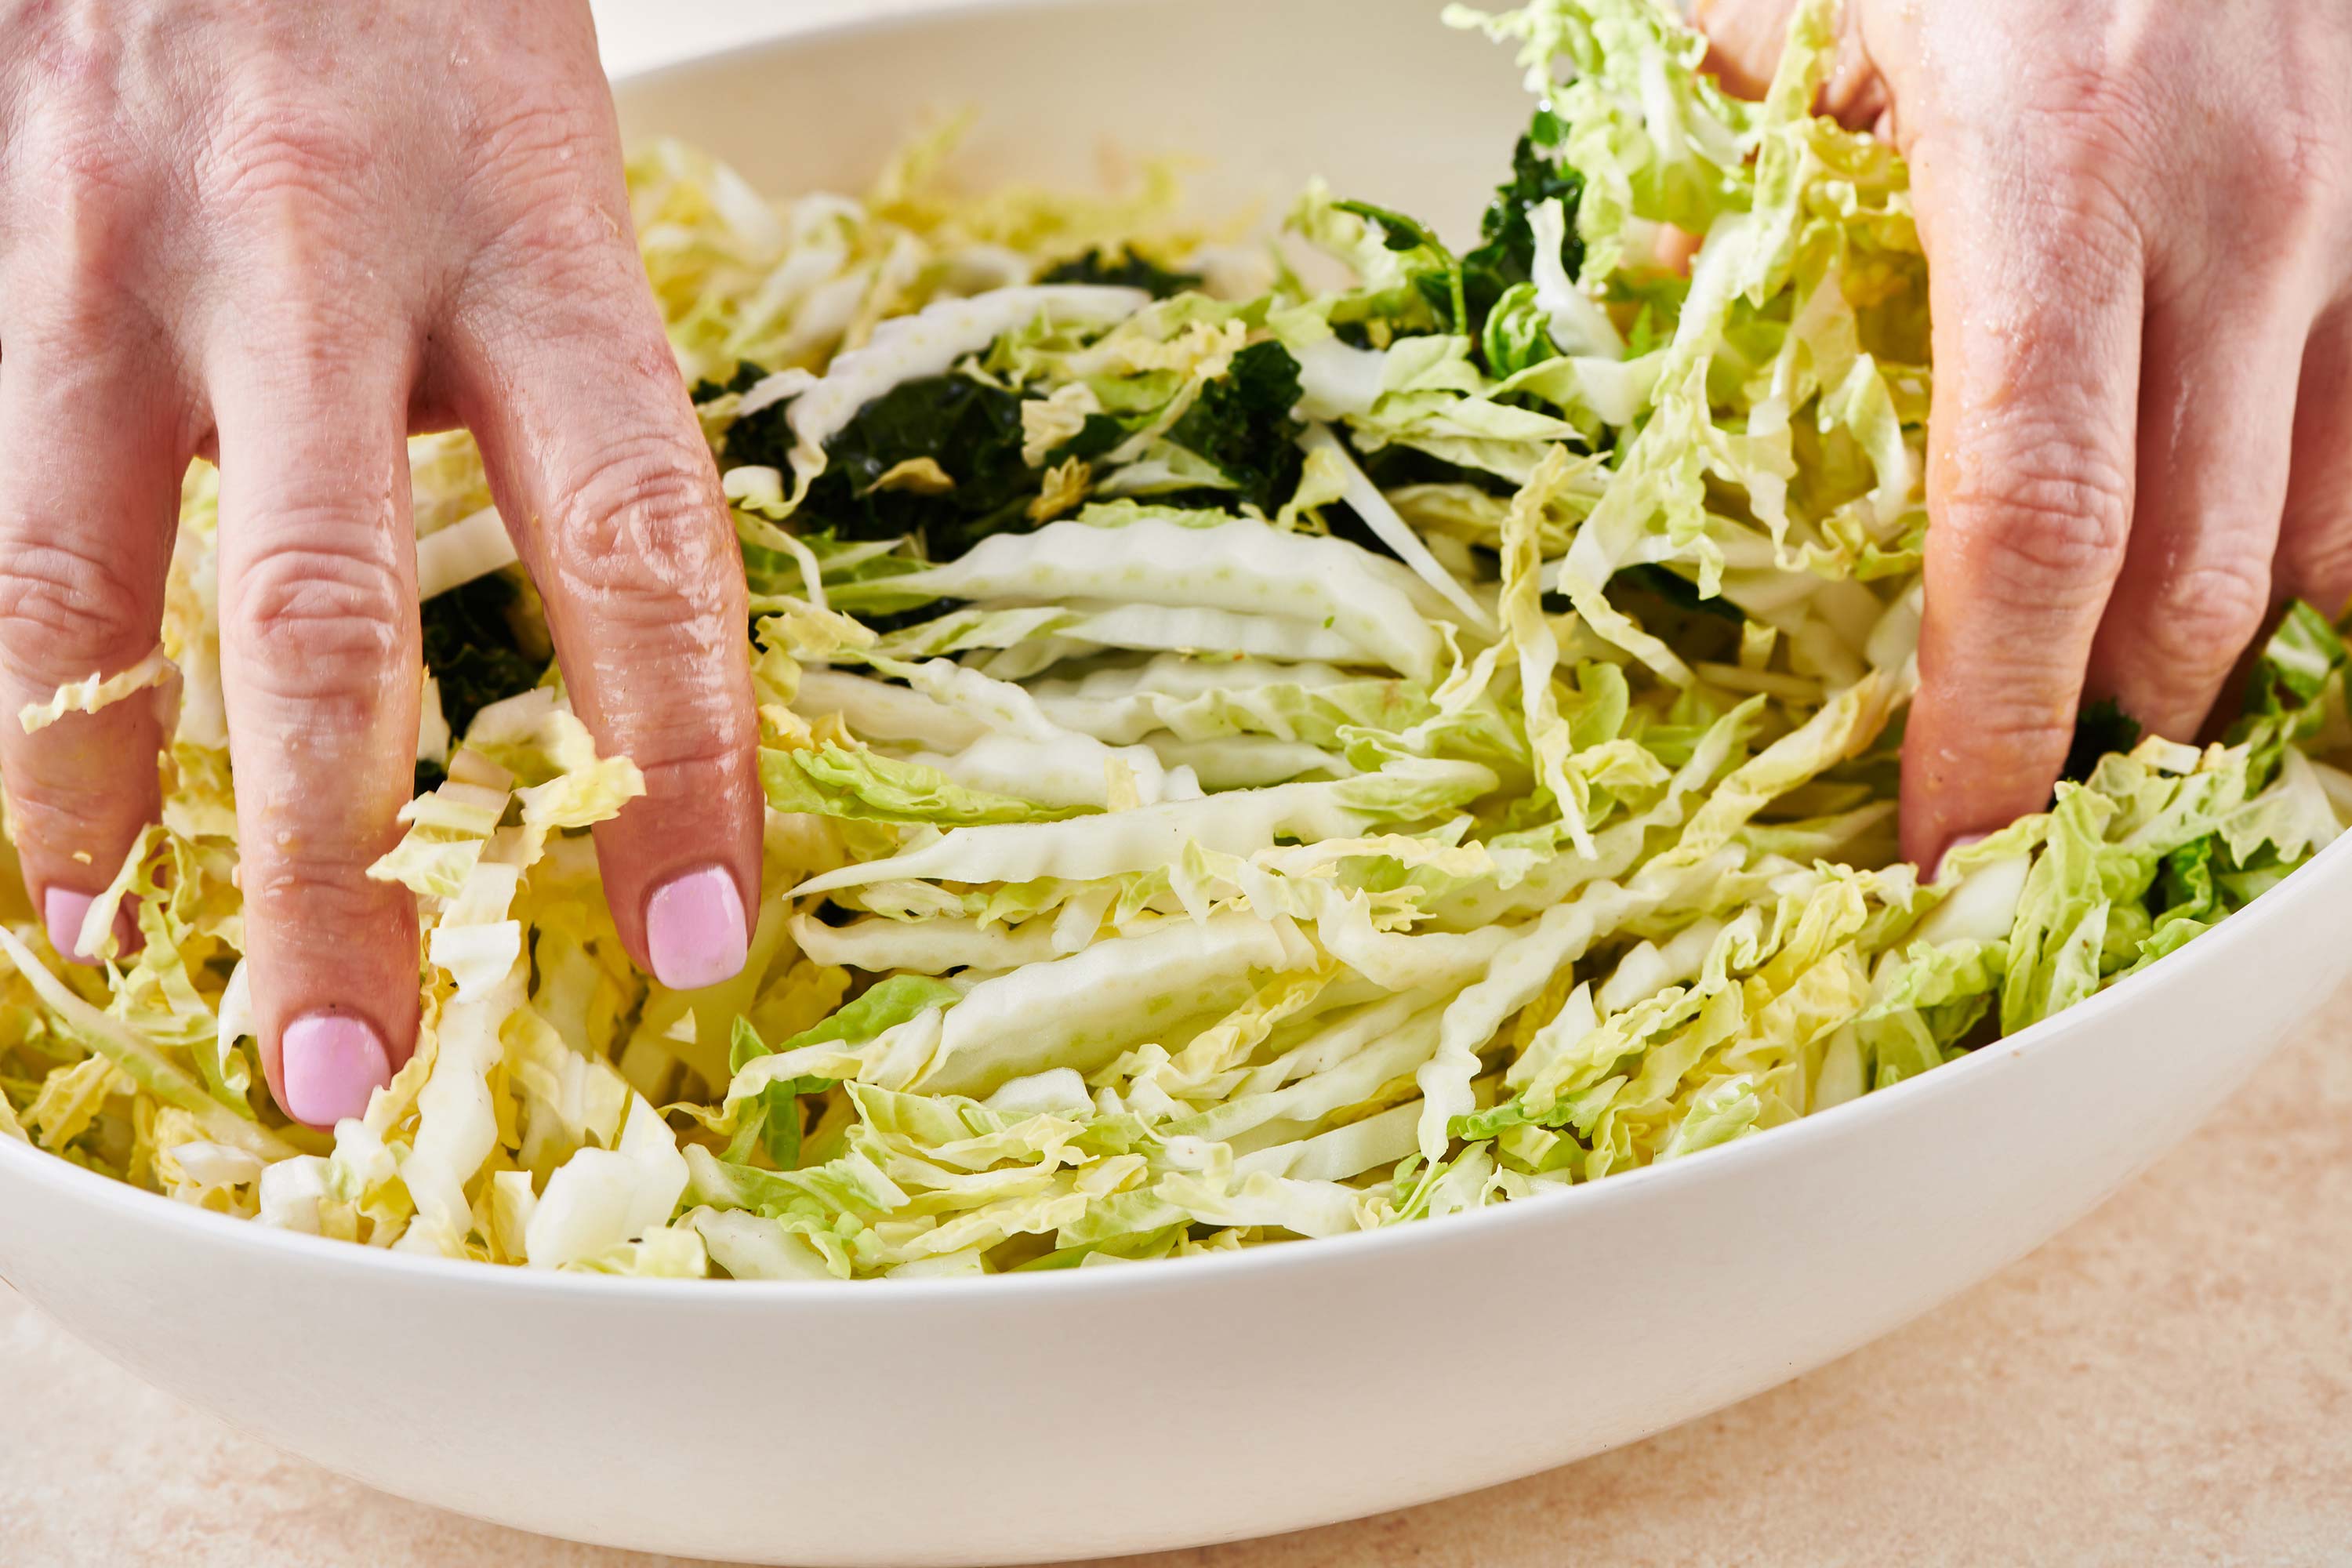 Woman tossing cabbage in a bowl of kale and dressing.